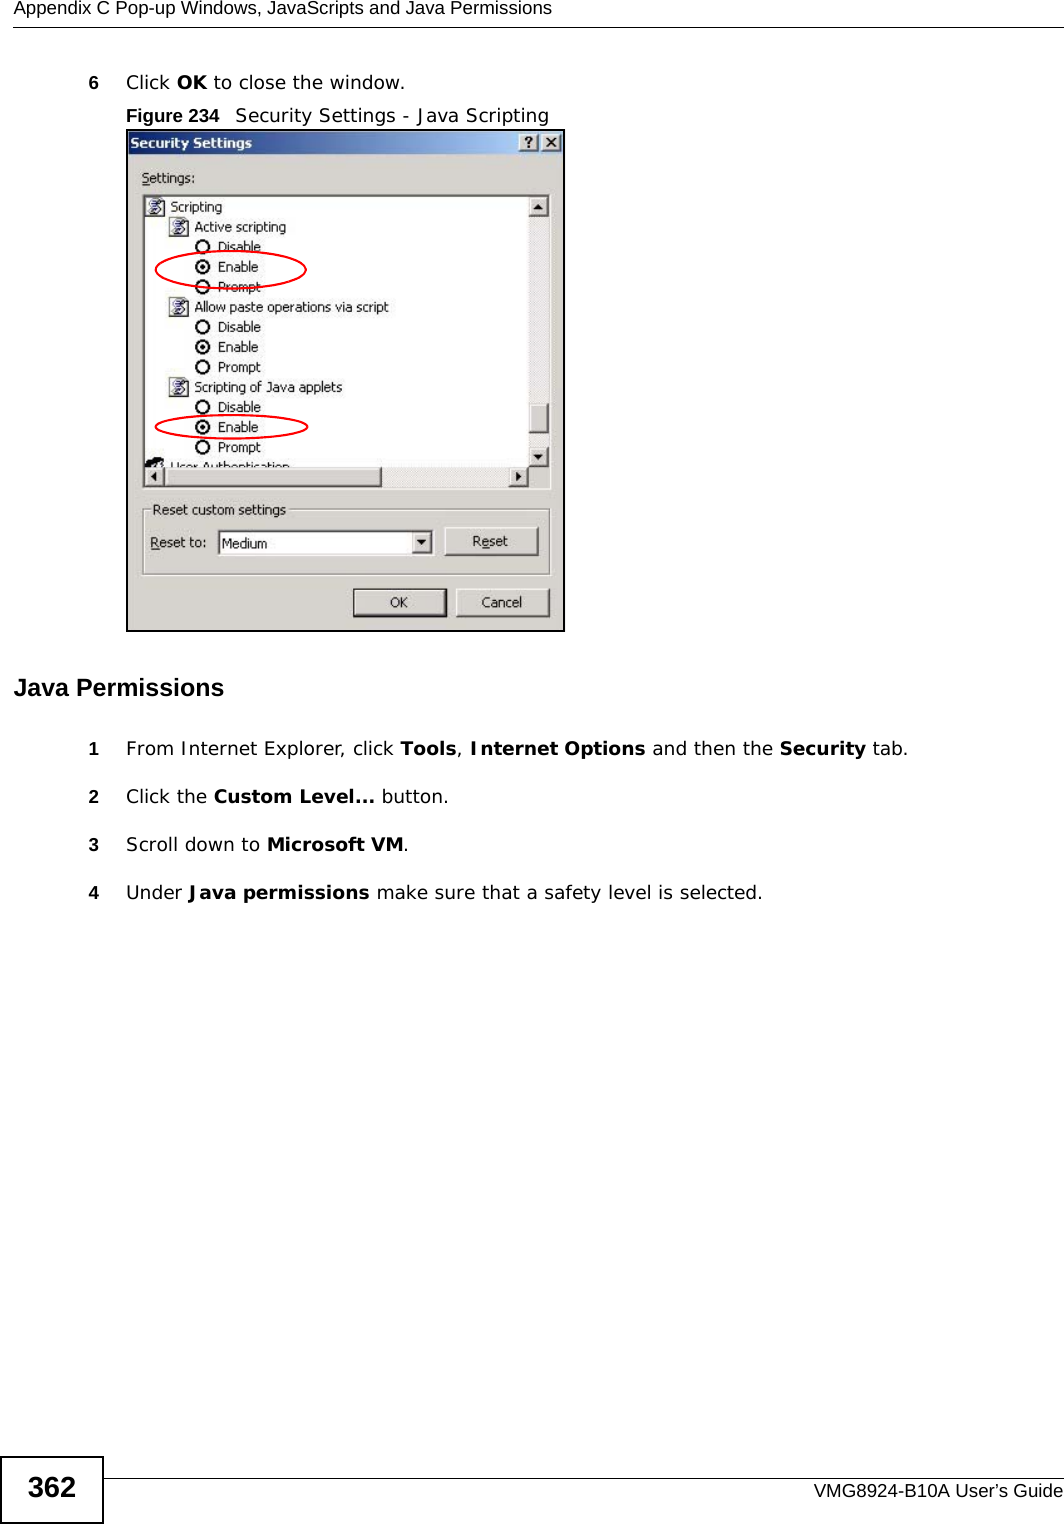 Appendix C Pop-up Windows, JavaScripts and Java PermissionsVMG8924-B10A User’s Guide3626Click OK to close the window.Figure 234   Security Settings - Java ScriptingJava Permissions1From Internet Explorer, click Tools, Internet Options and then the Security tab. 2Click the Custom Level... button. 3Scroll down to Microsoft VM. 4Under Java permissions make sure that a safety level is selected.